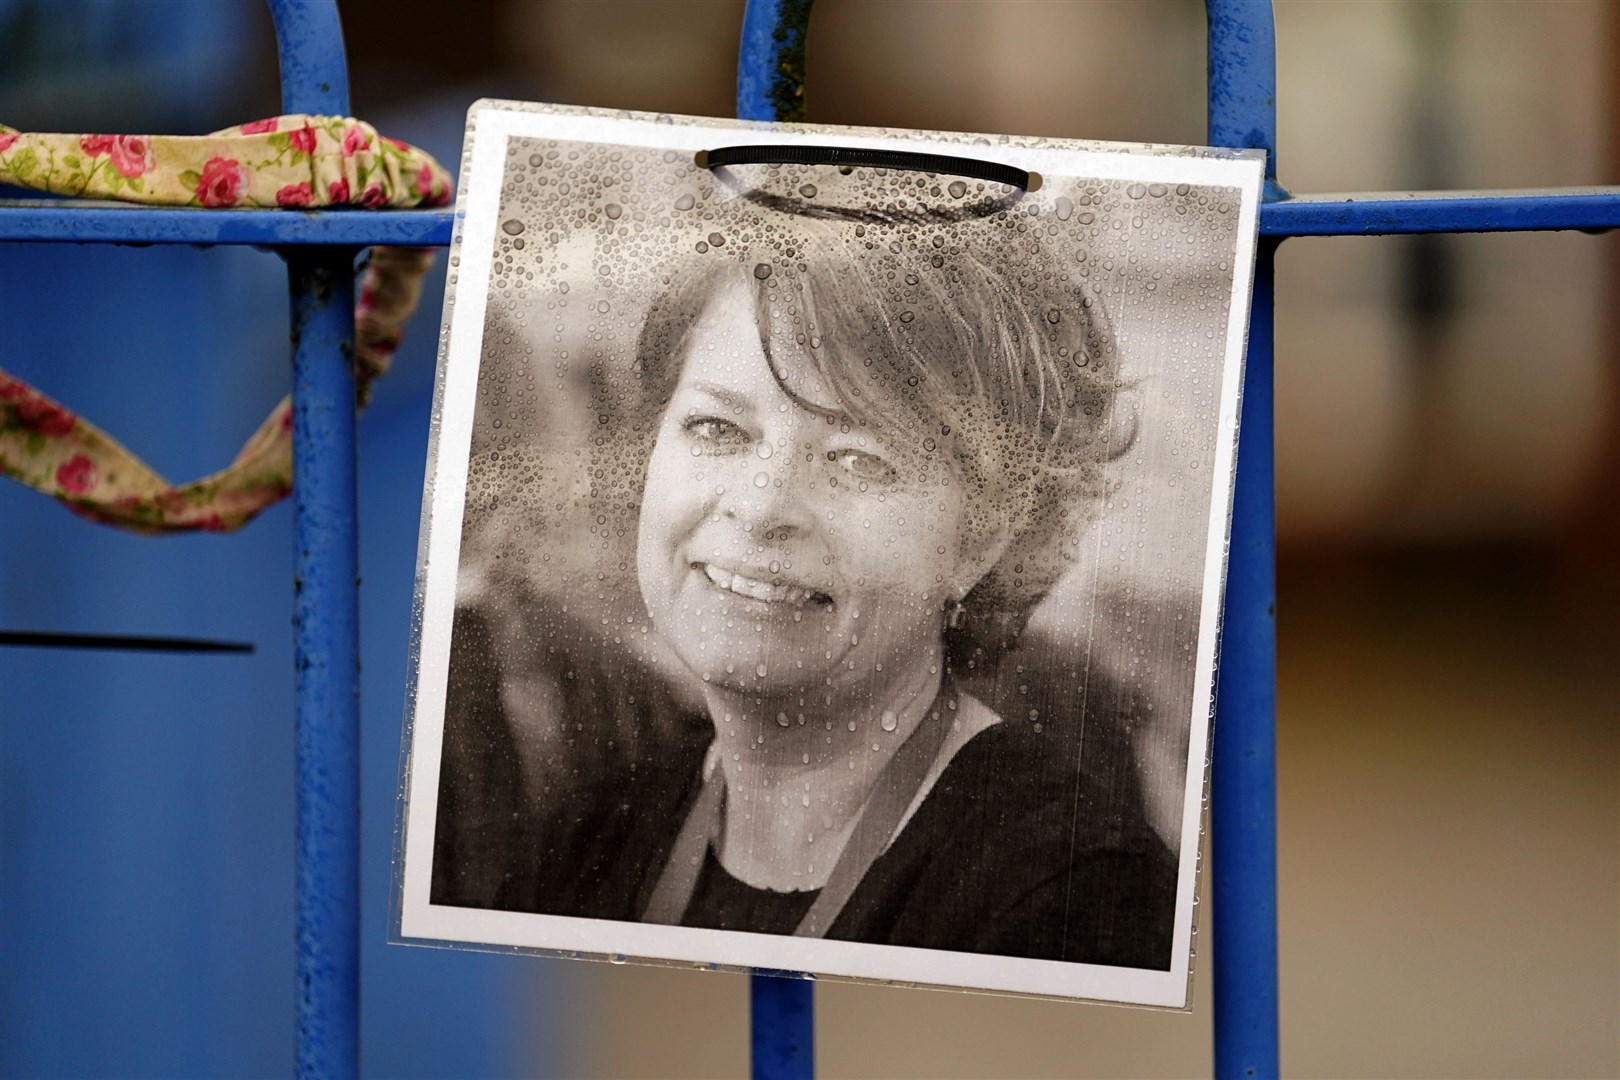 Headteacher Ruth Perry died in January while waiting for an Ofsted report (Andrew Matthews/PA)